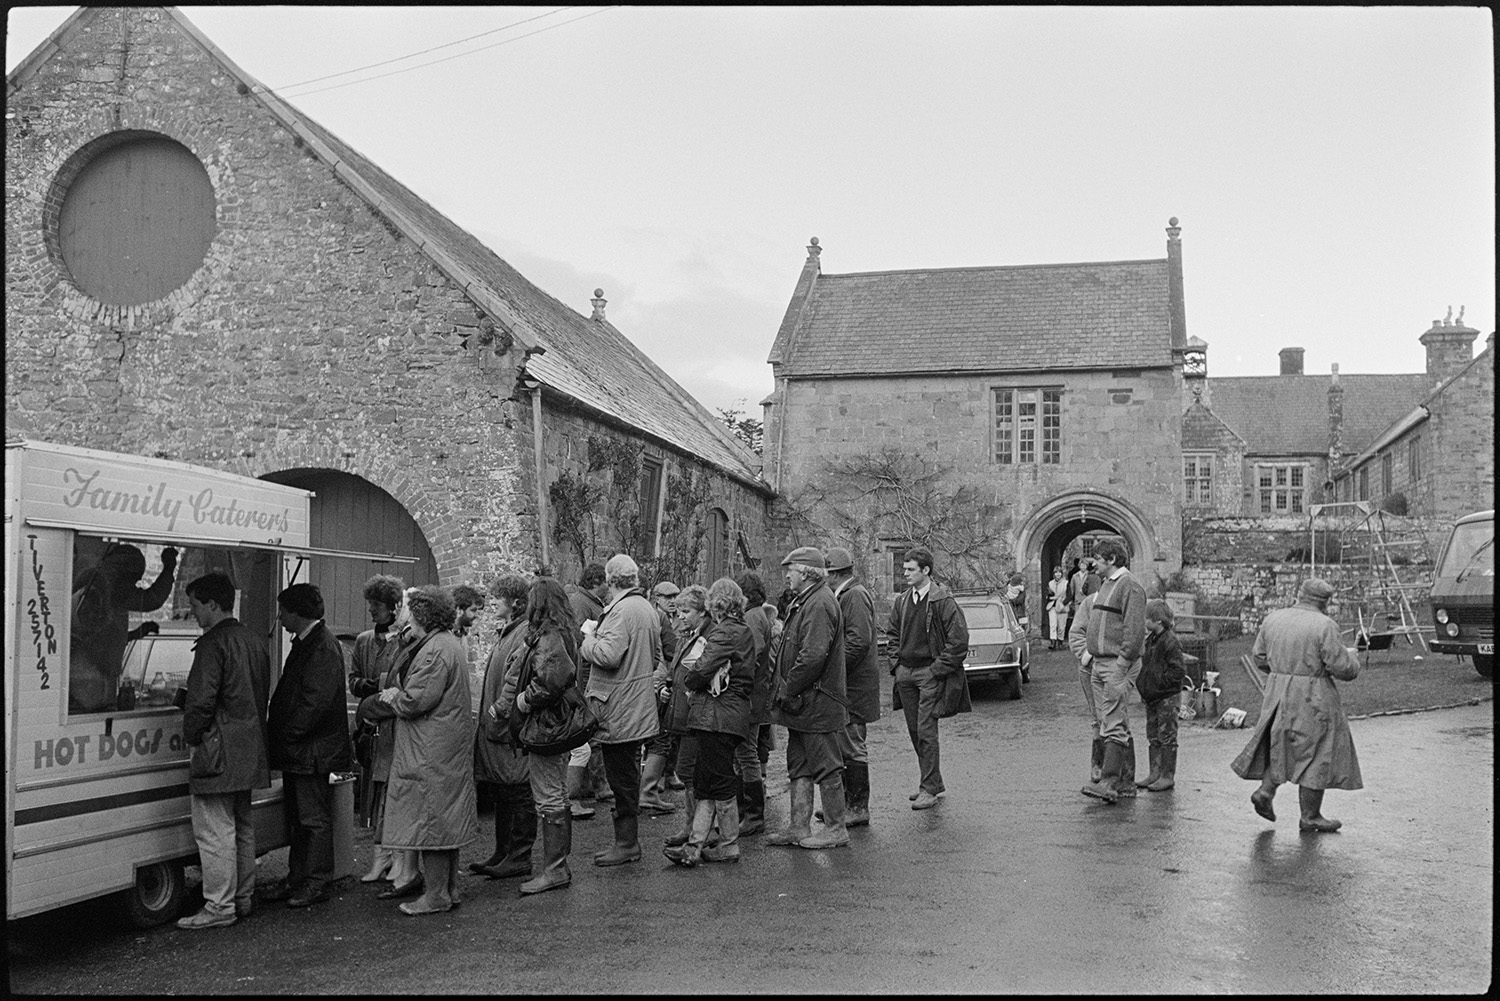 Large house sale, people looking at sale goods, watching bidding, panelled room, arch.
[Men and women lining up for refreshments at a catering van during an auction at Colleton Manor, Chulmleigh. Items for sale and stone buildings are visible in the background.]